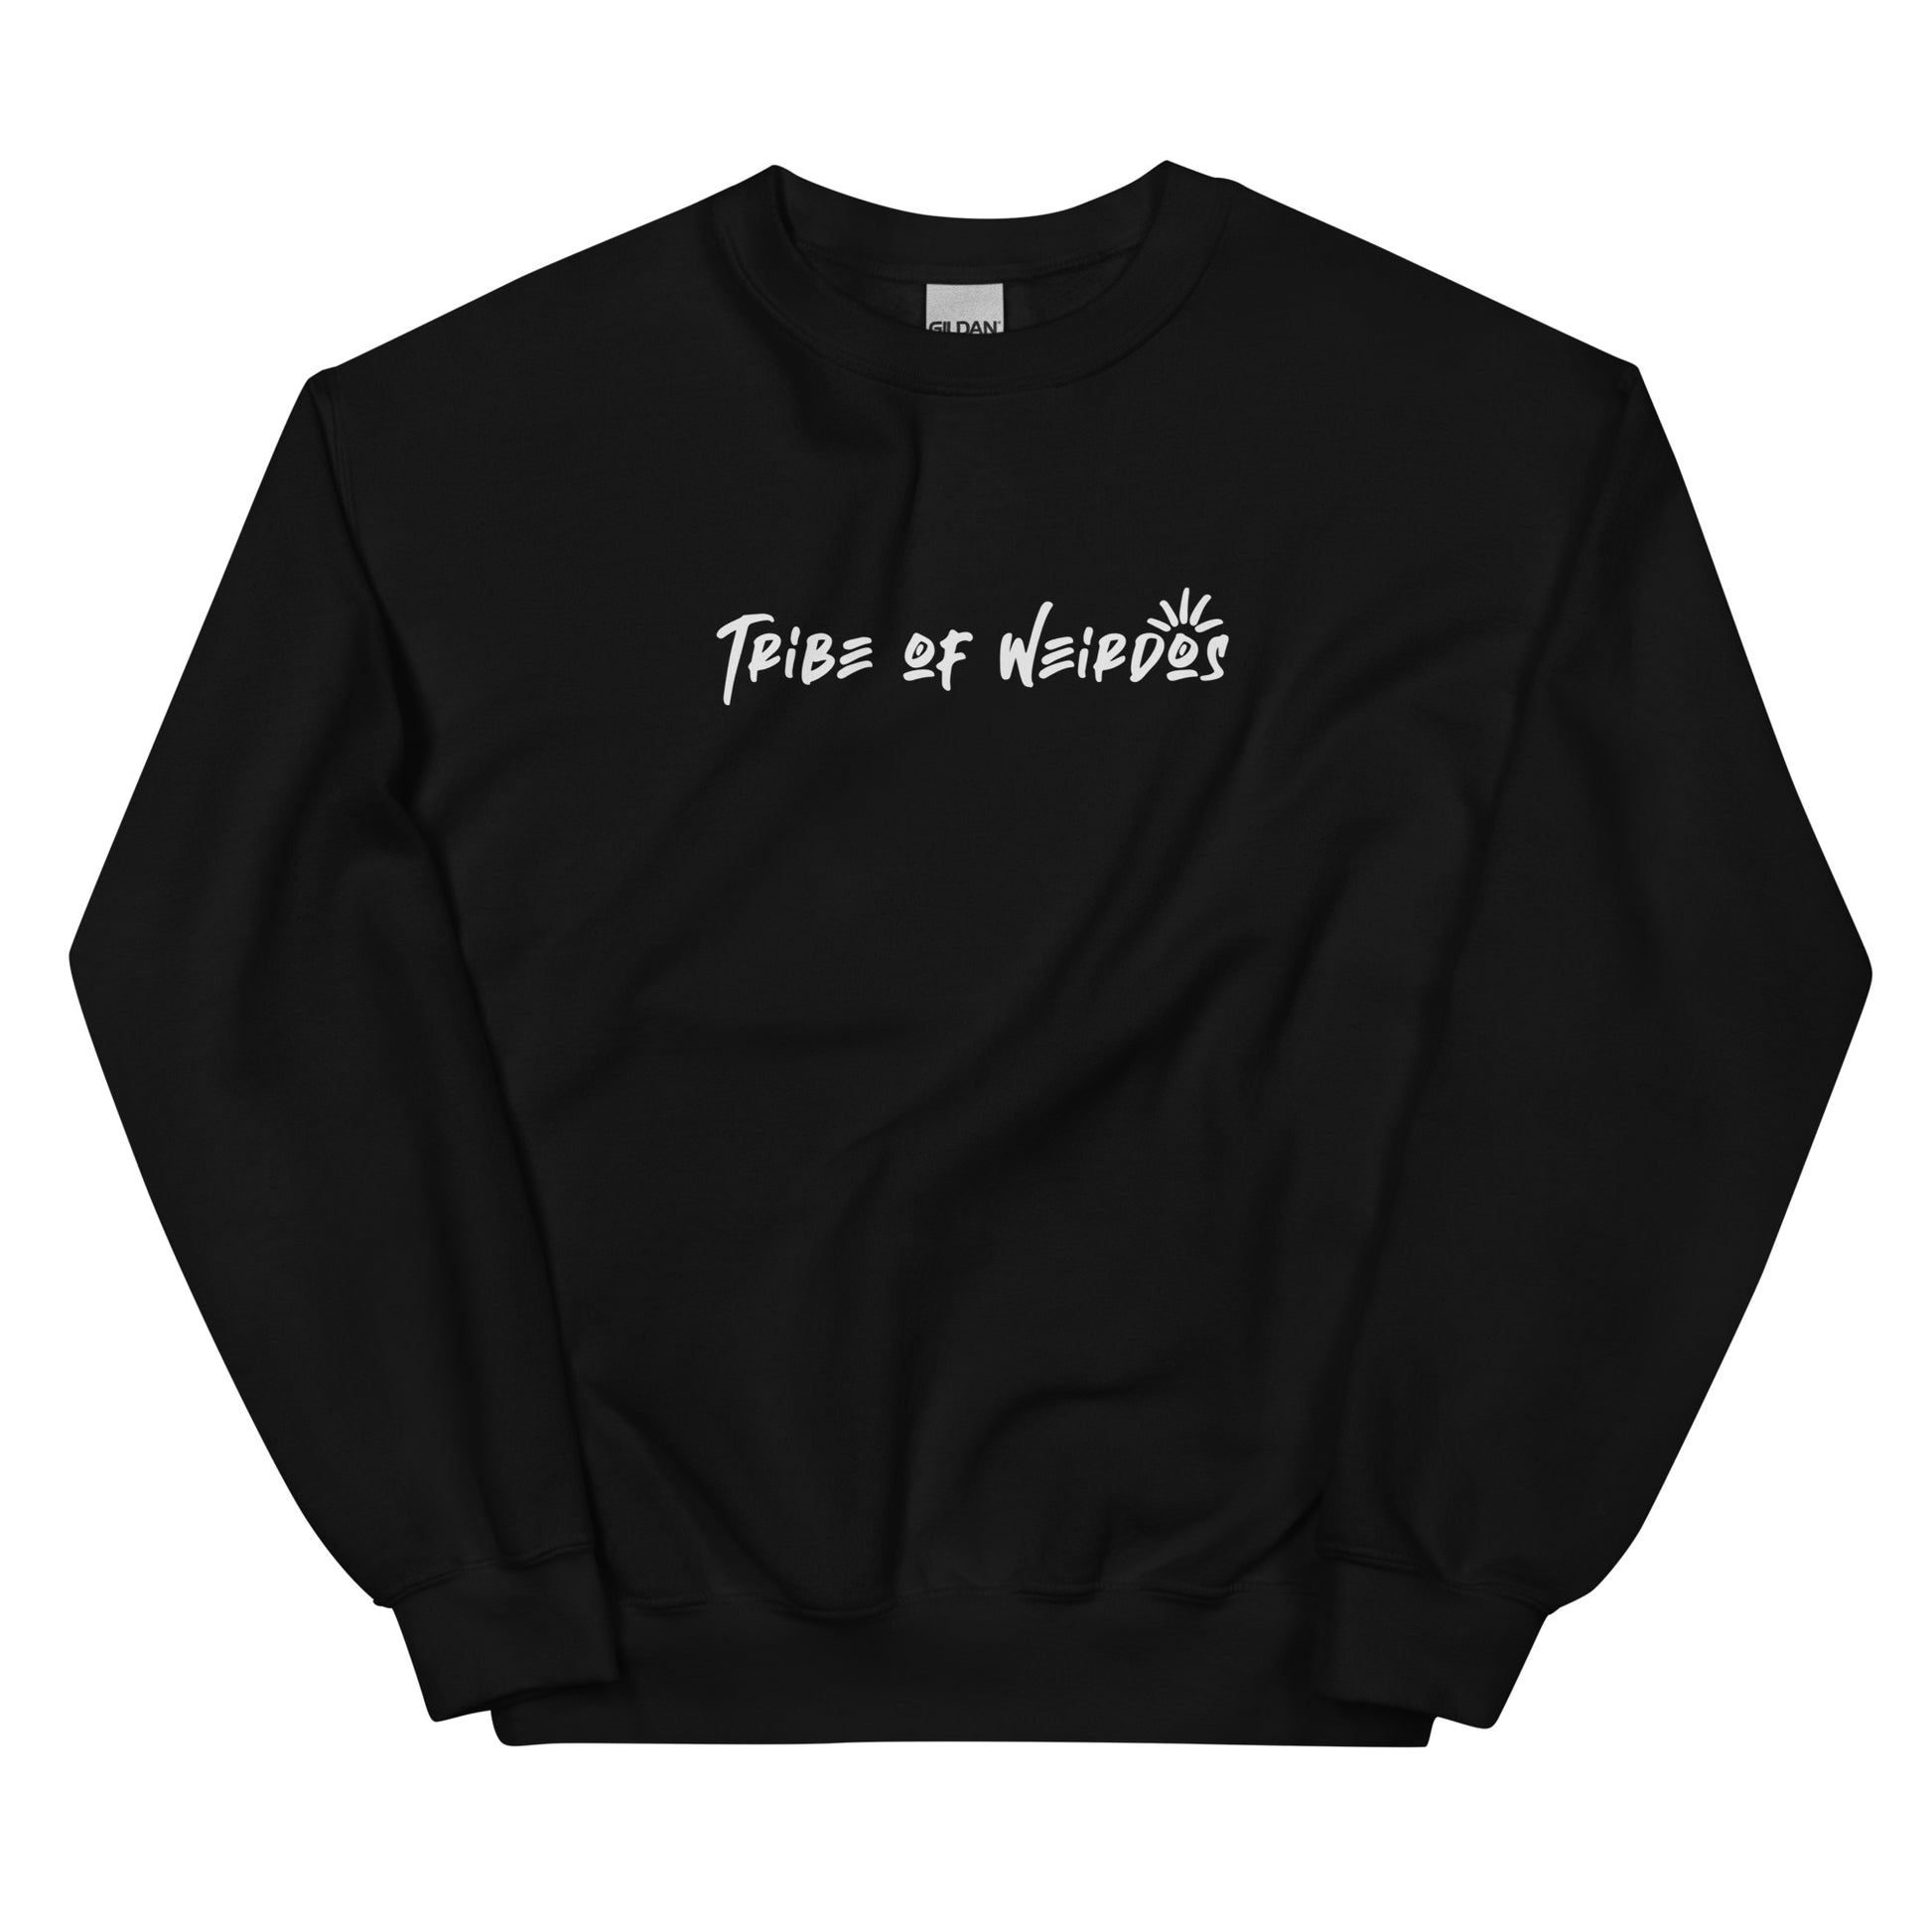 Soft and stylish Tribe of Weirdos Unisex Sweatshirt, combining casual comfort with a message of self-acceptance and community spirit.